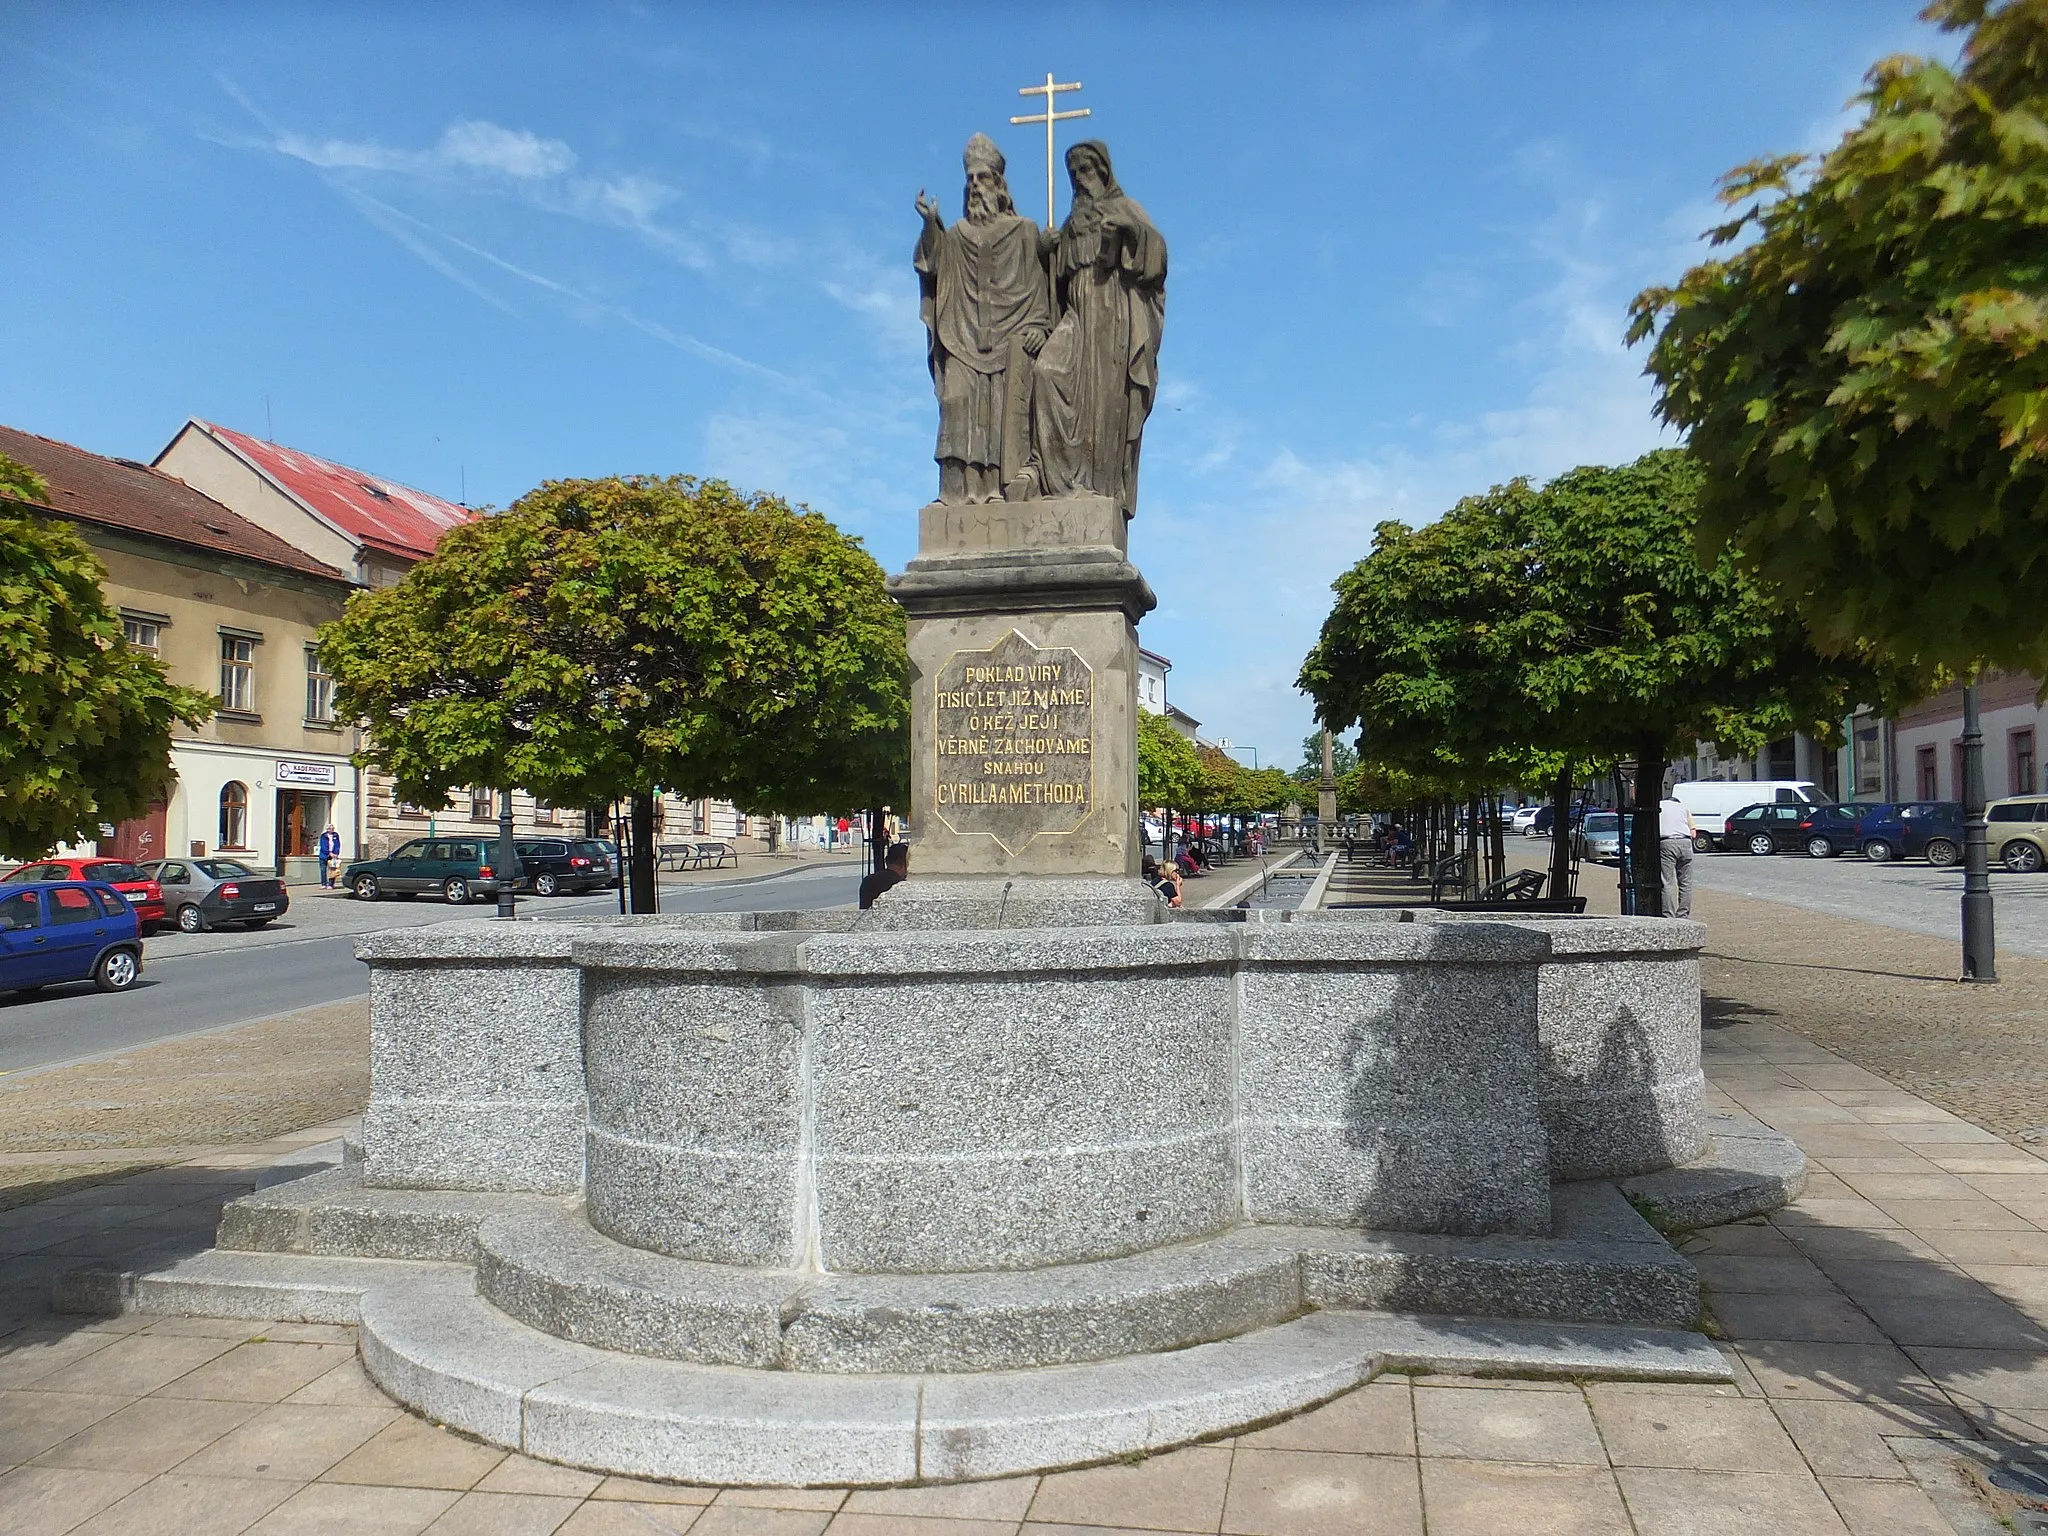 Photo showing: The fountain with the sculptural group of Saints Cyril and Methodius on the square in Bystřice nad Pernštejnem